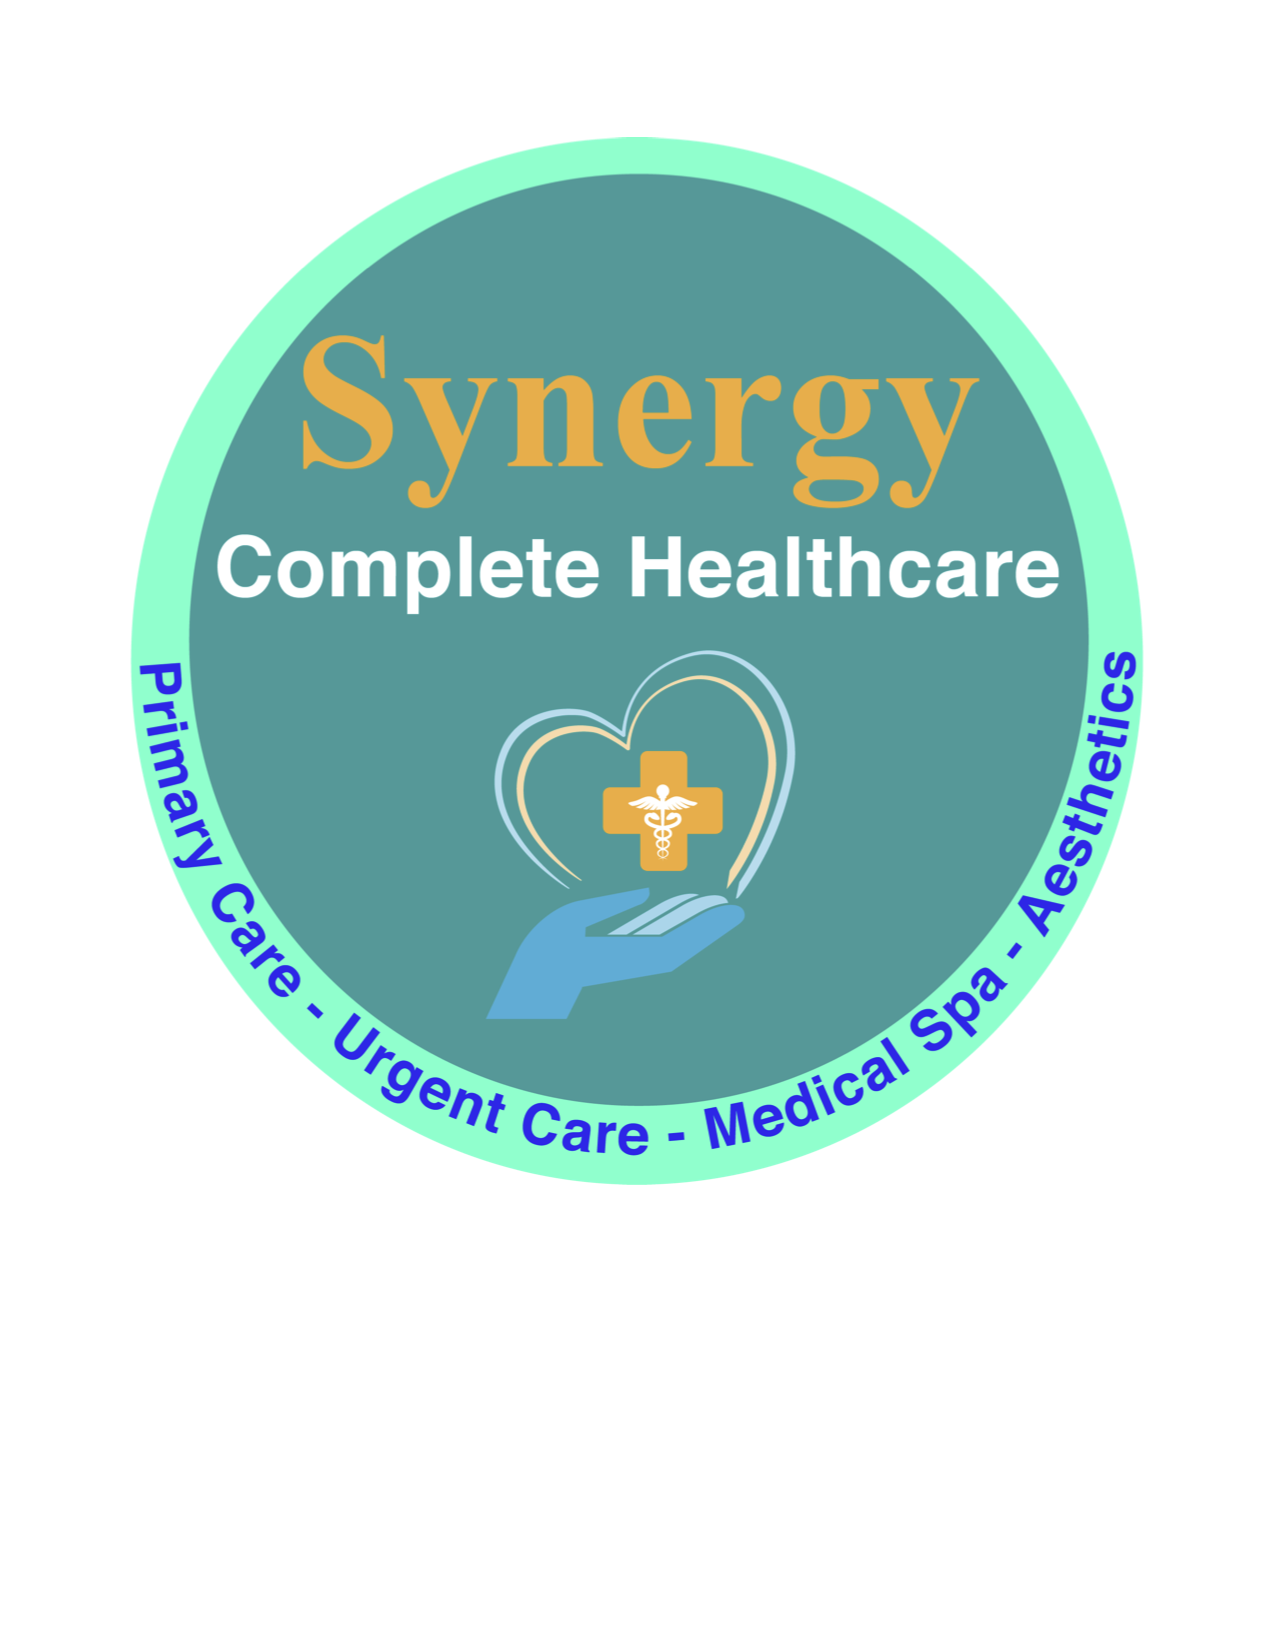 synergy healthcare services